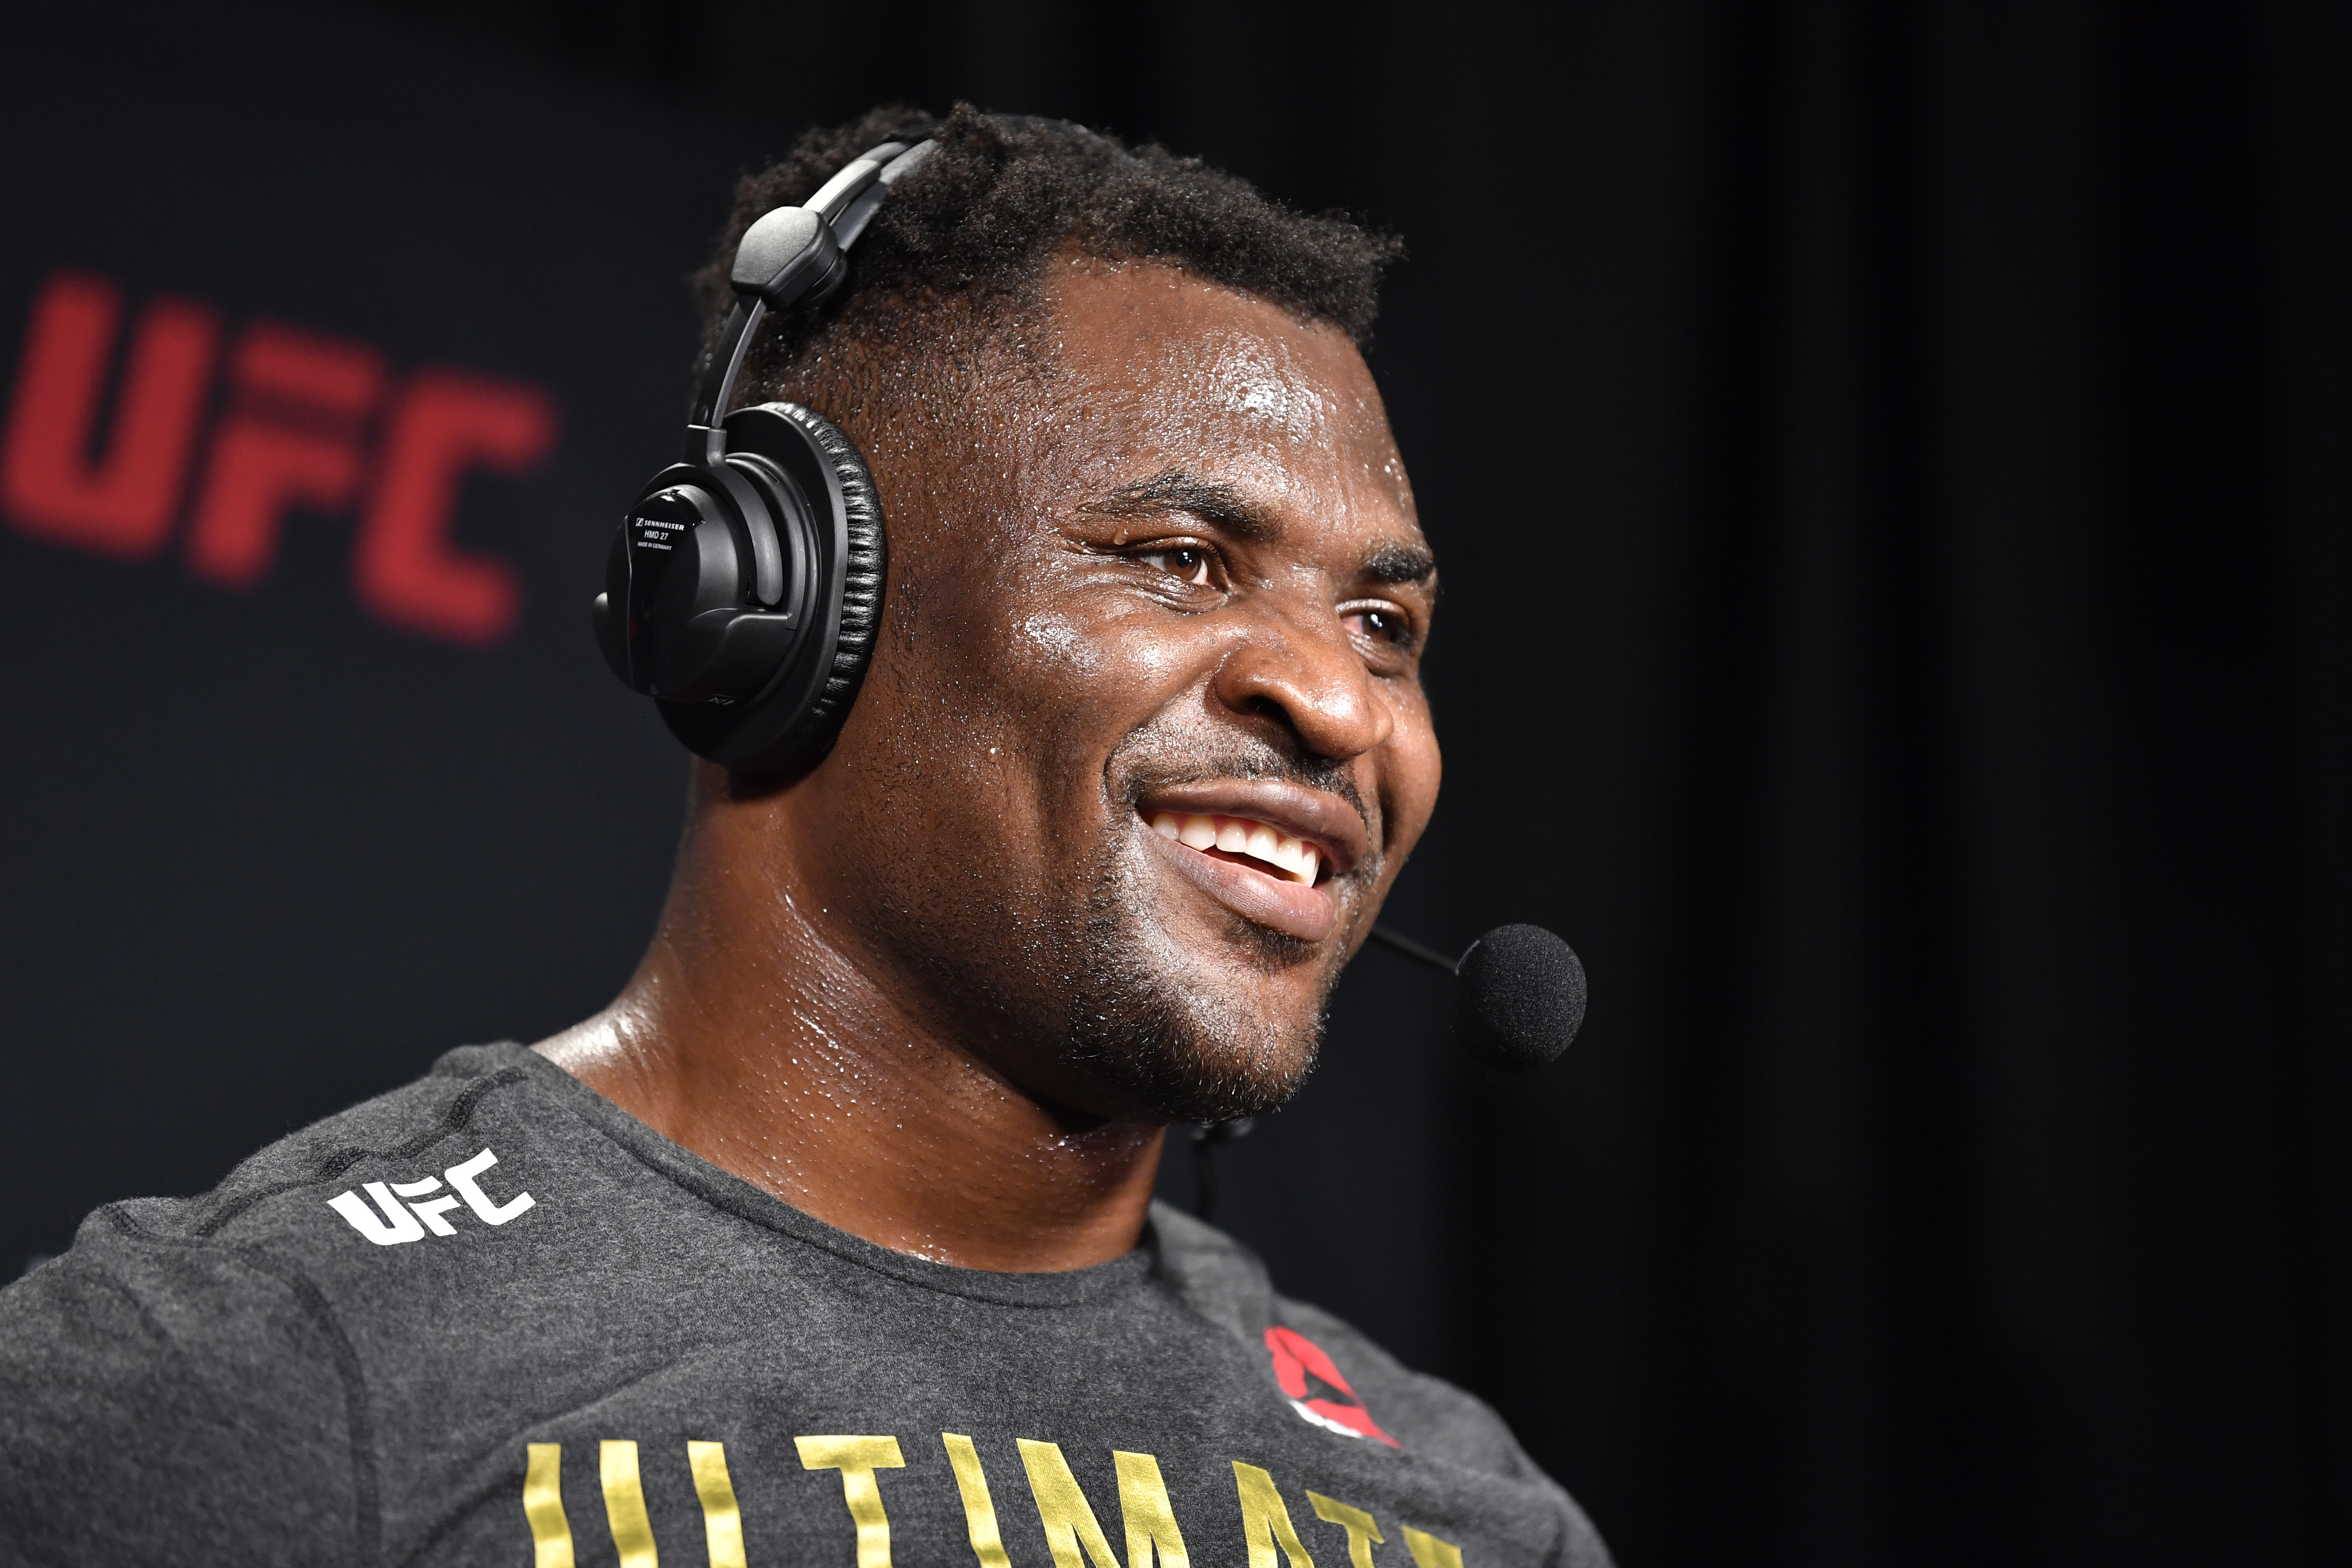 Francis Ngannou Went From Working in an African Mine to Building the 1st MMA Gym in His Native Cameroon